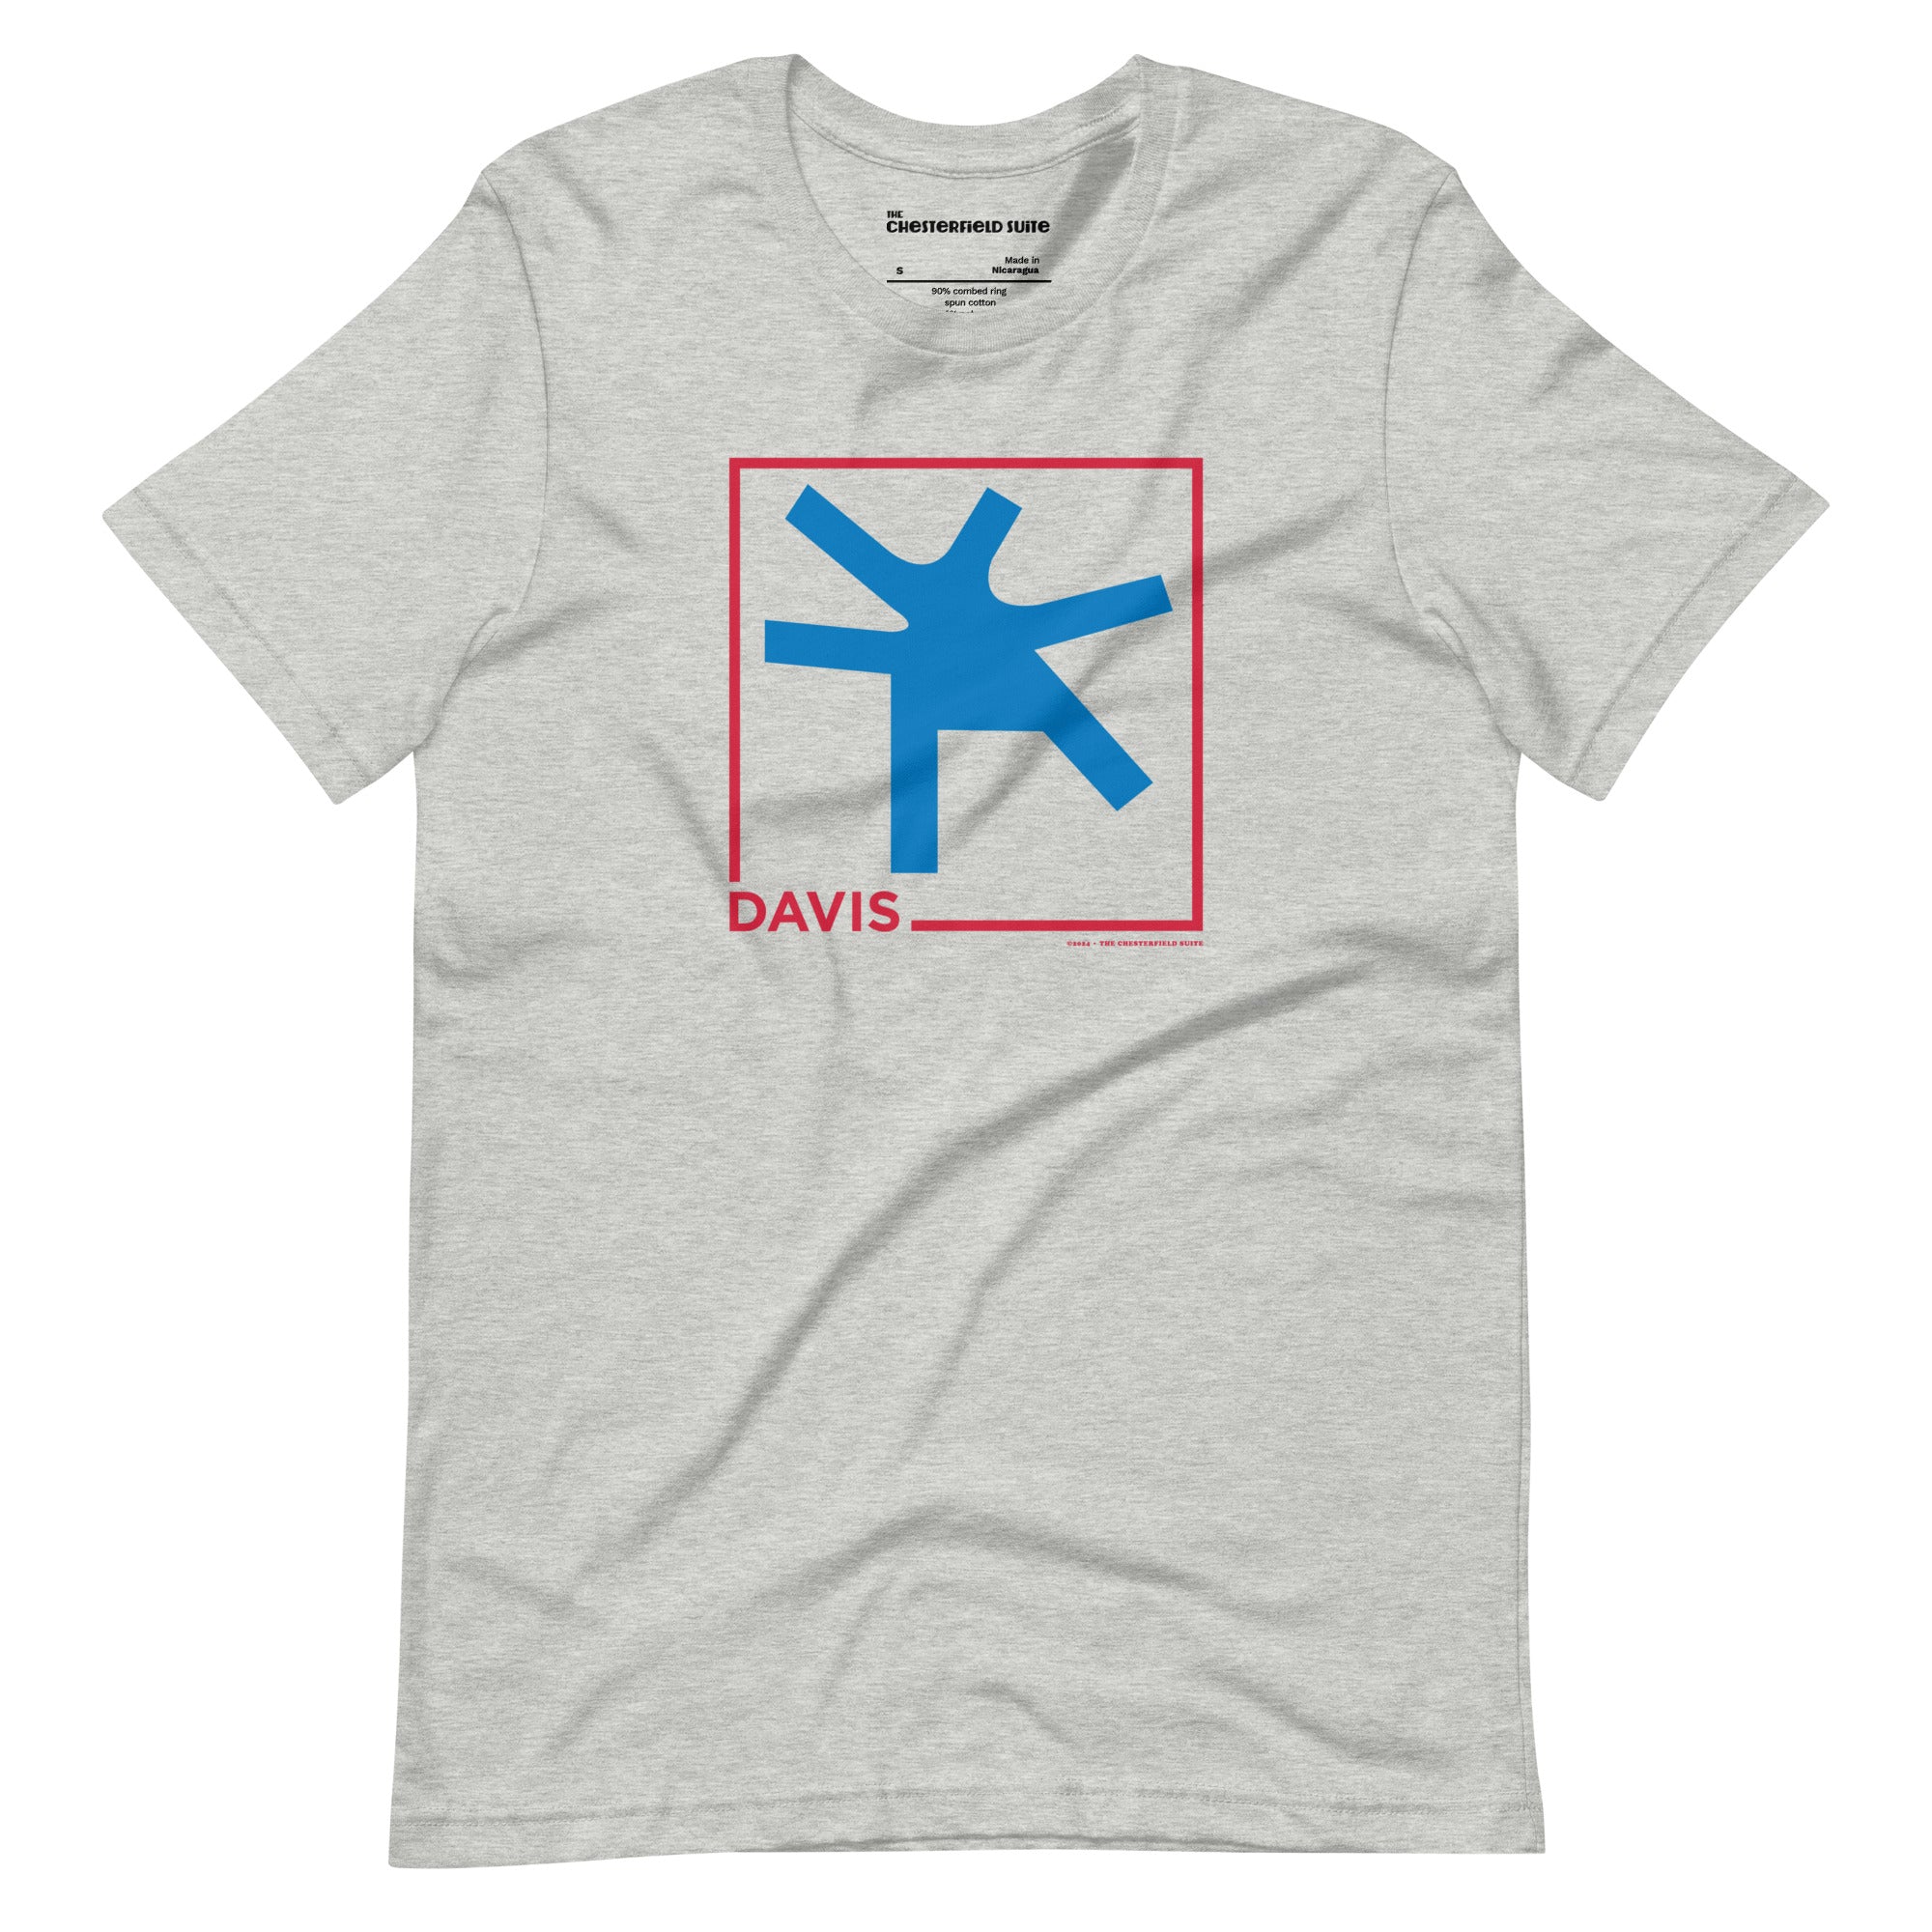 Grey unisex t-shirt with the word Davis and a square in red, with the blue intersection